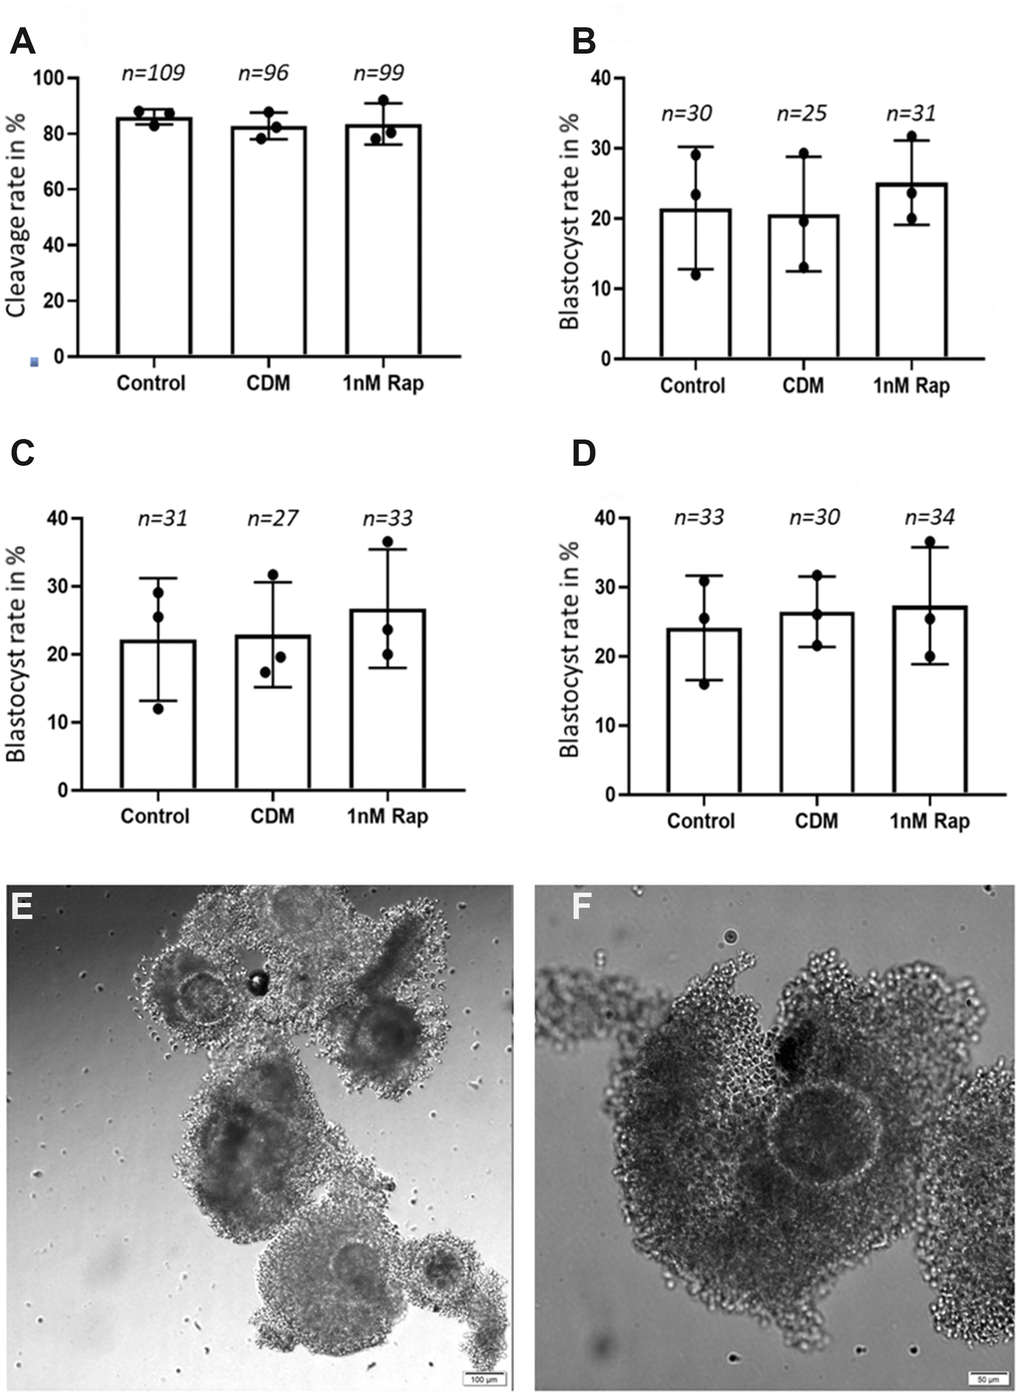 Influence of 1nM Rapamycin supplementation on early embryonic development. The results are presented as cleavage rates and blastocyst rates in % (total number of metaphase II oocyte/total number of embryonic stage). (A) shows the results for proper cleaved embryos on day 4 in the three experimental groups. (B) shows the results for the blastocyst rate on day 7 in the three experimental groups. (C) shows the results for the blastocyst rate on day 8 in the three experimental groups. (D) shows the results for the blastocyst rate on day 9 in the three experimental groups. A total of 695 good quality COCs (representative COCs shown in (E) [scale bar: 100 μm] and (F) [scale bar: 50 μm]) were used for the in vitro maturation, fertilization, and culture until day 9, and the "n" above each bar represents the number of detected good quality early cleavage stage embryos, (control= control without supplementation, CDM=vehicle control with DMSO supplementation, 1nMRap= 1nM Rapamycin supplementation).